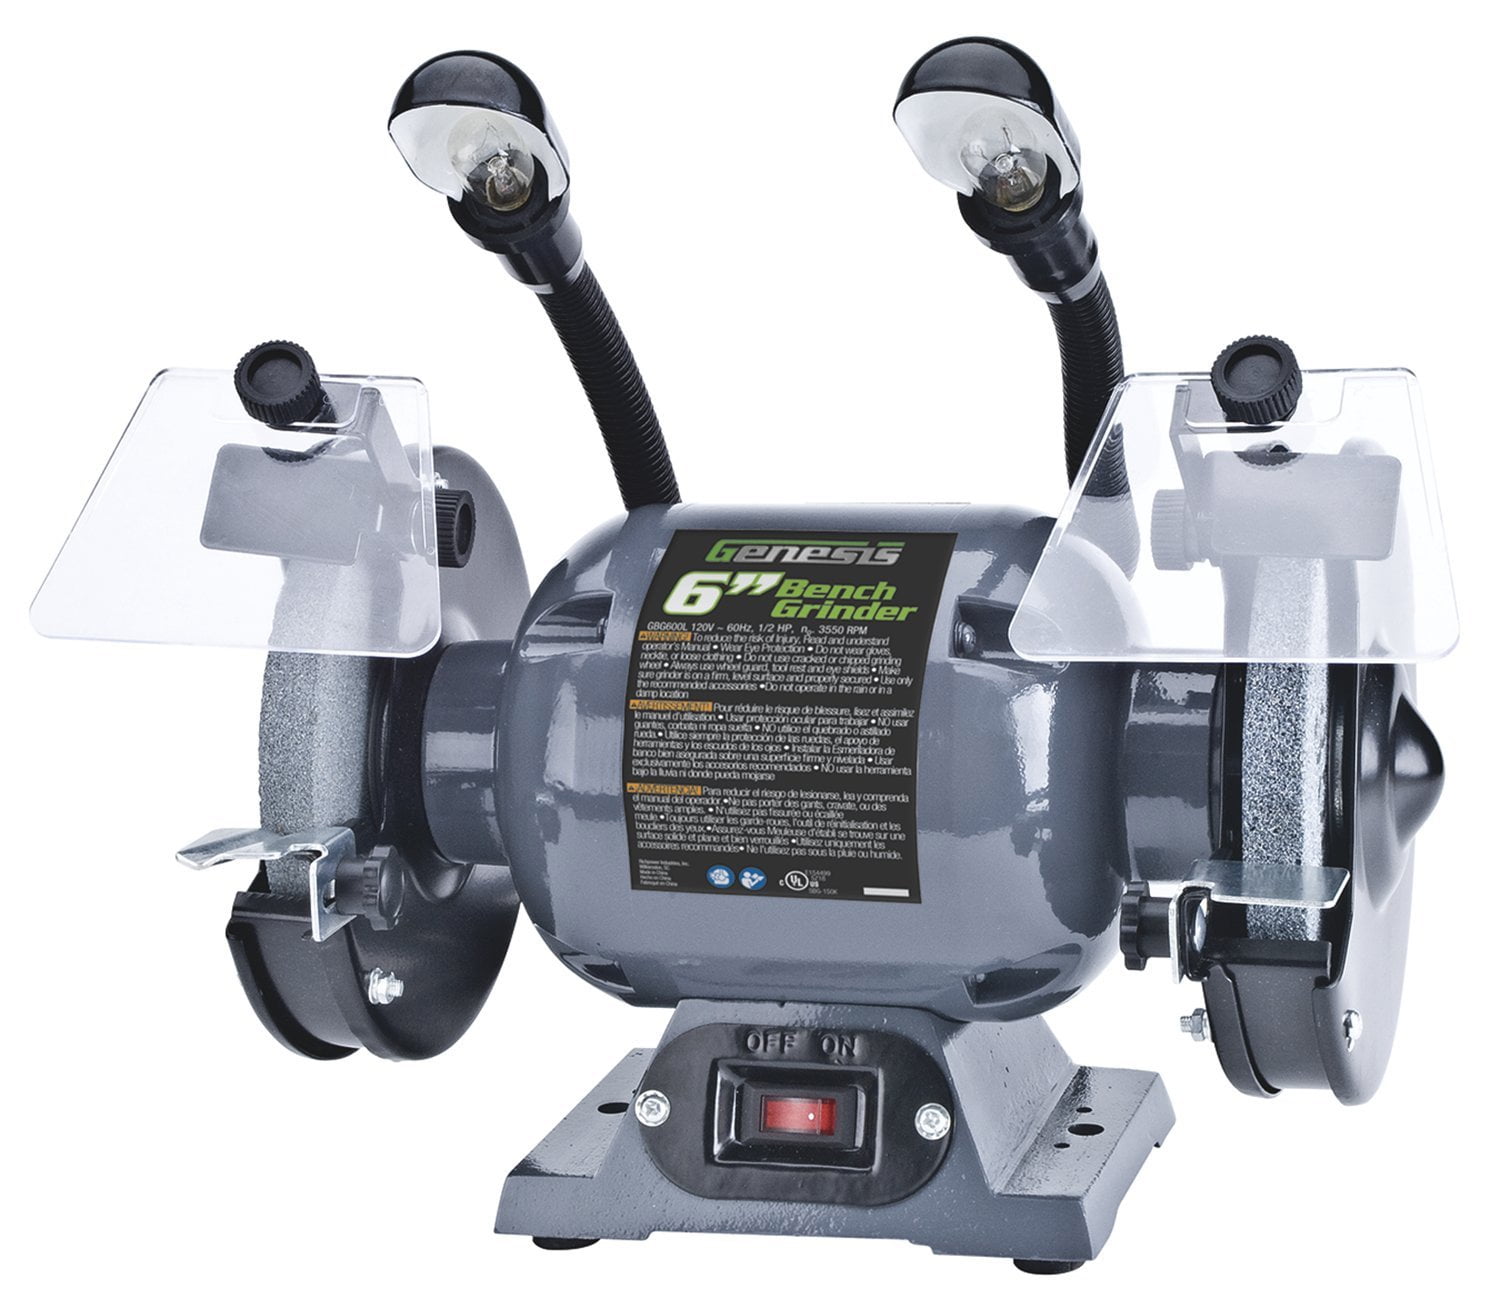 Performance Tool W50001 1/2 HP Motor 6-Inch Bench Grinder With Light